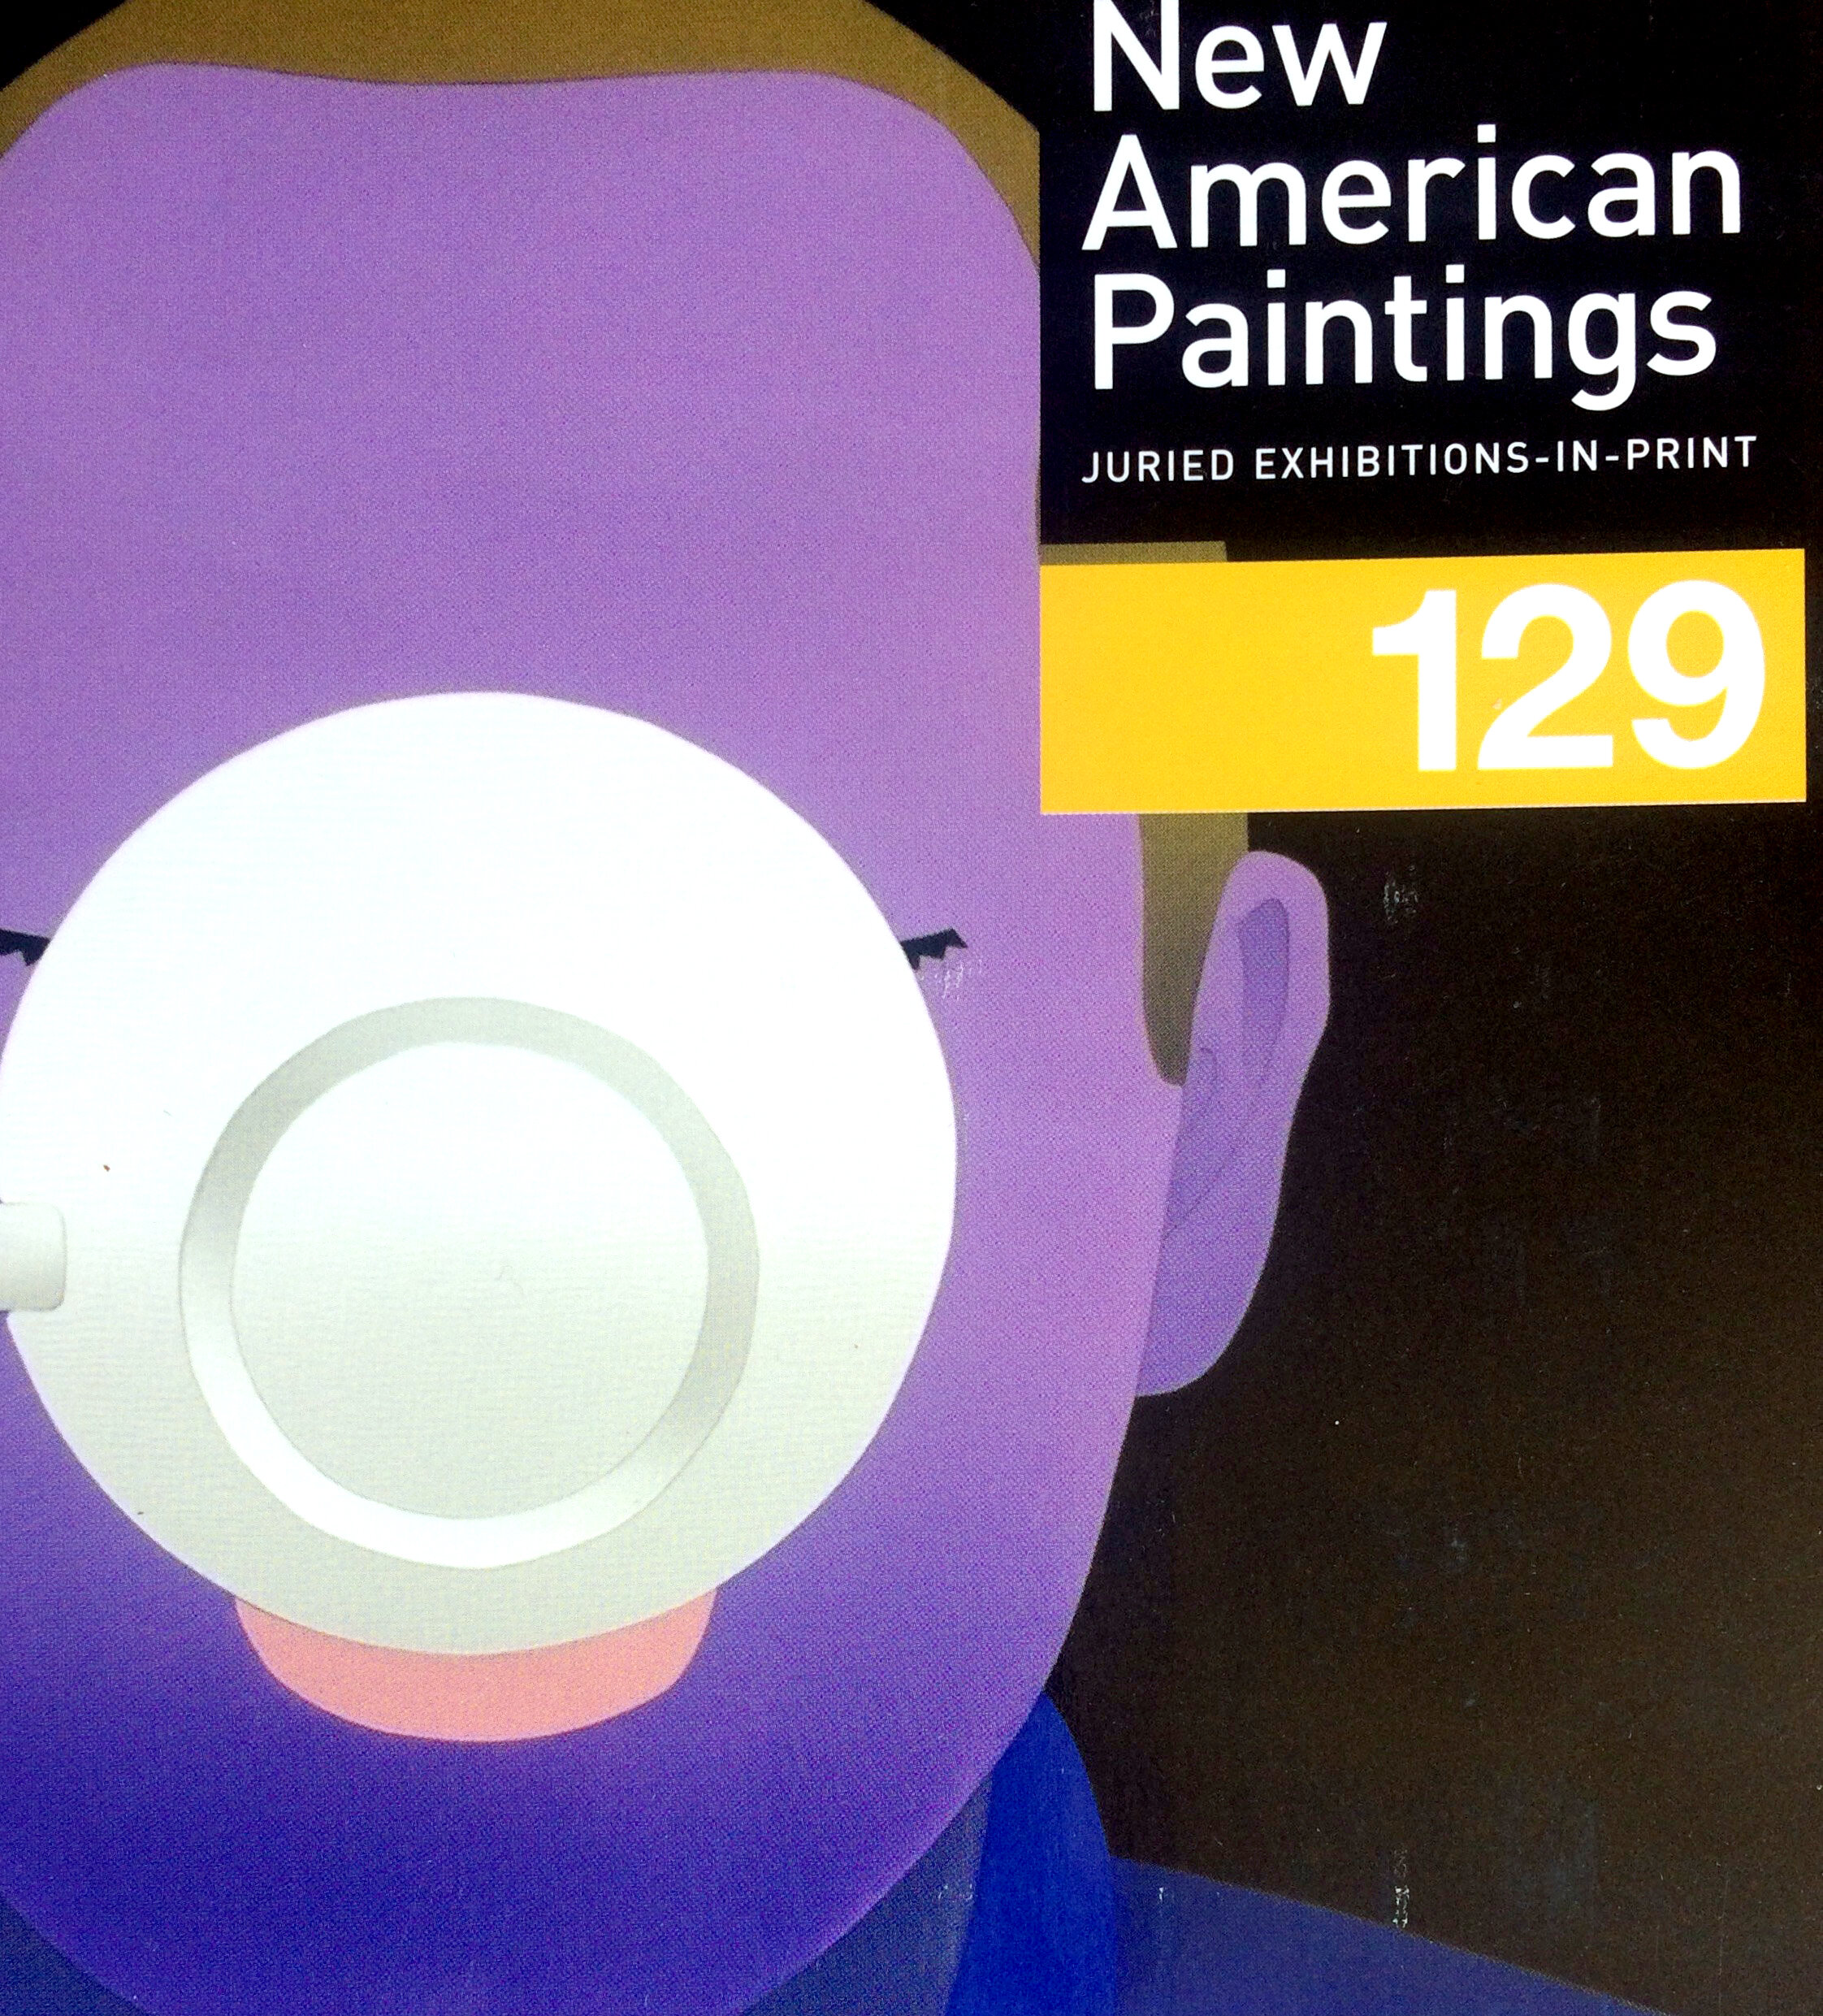 New-AMERICAN-PAINTINGS_129_MFA_cover_art_blog_frank-j-stockton_JURIED-EXHIBITION-COMPETITION-PAINTER